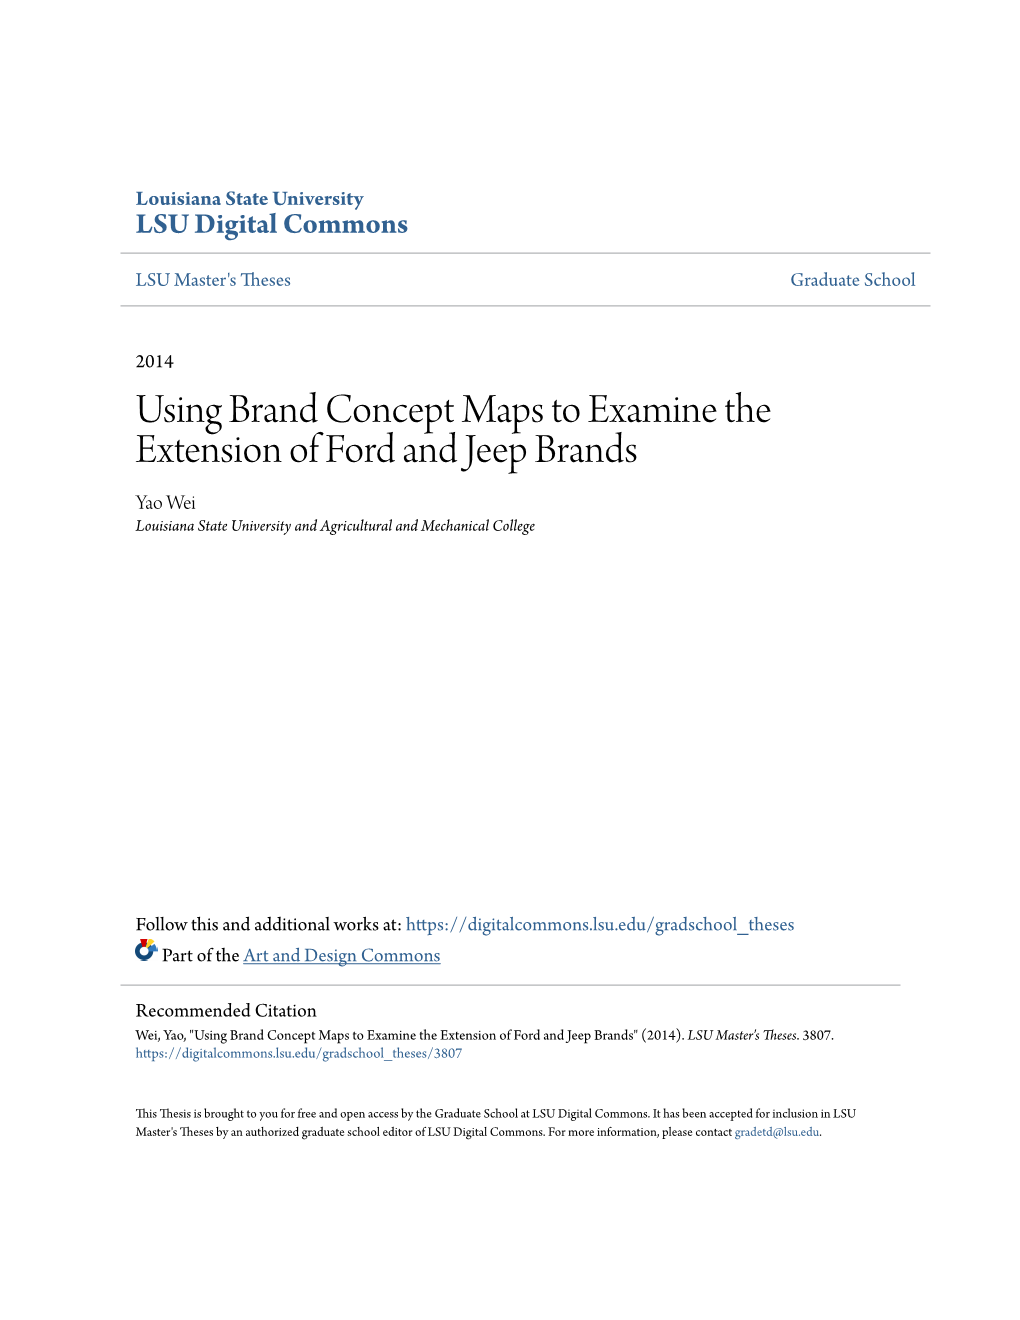 Using Brand Concept Maps to Examine the Extension of Ford and Jeep Brands Yao Wei Louisiana State University and Agricultural and Mechanical College